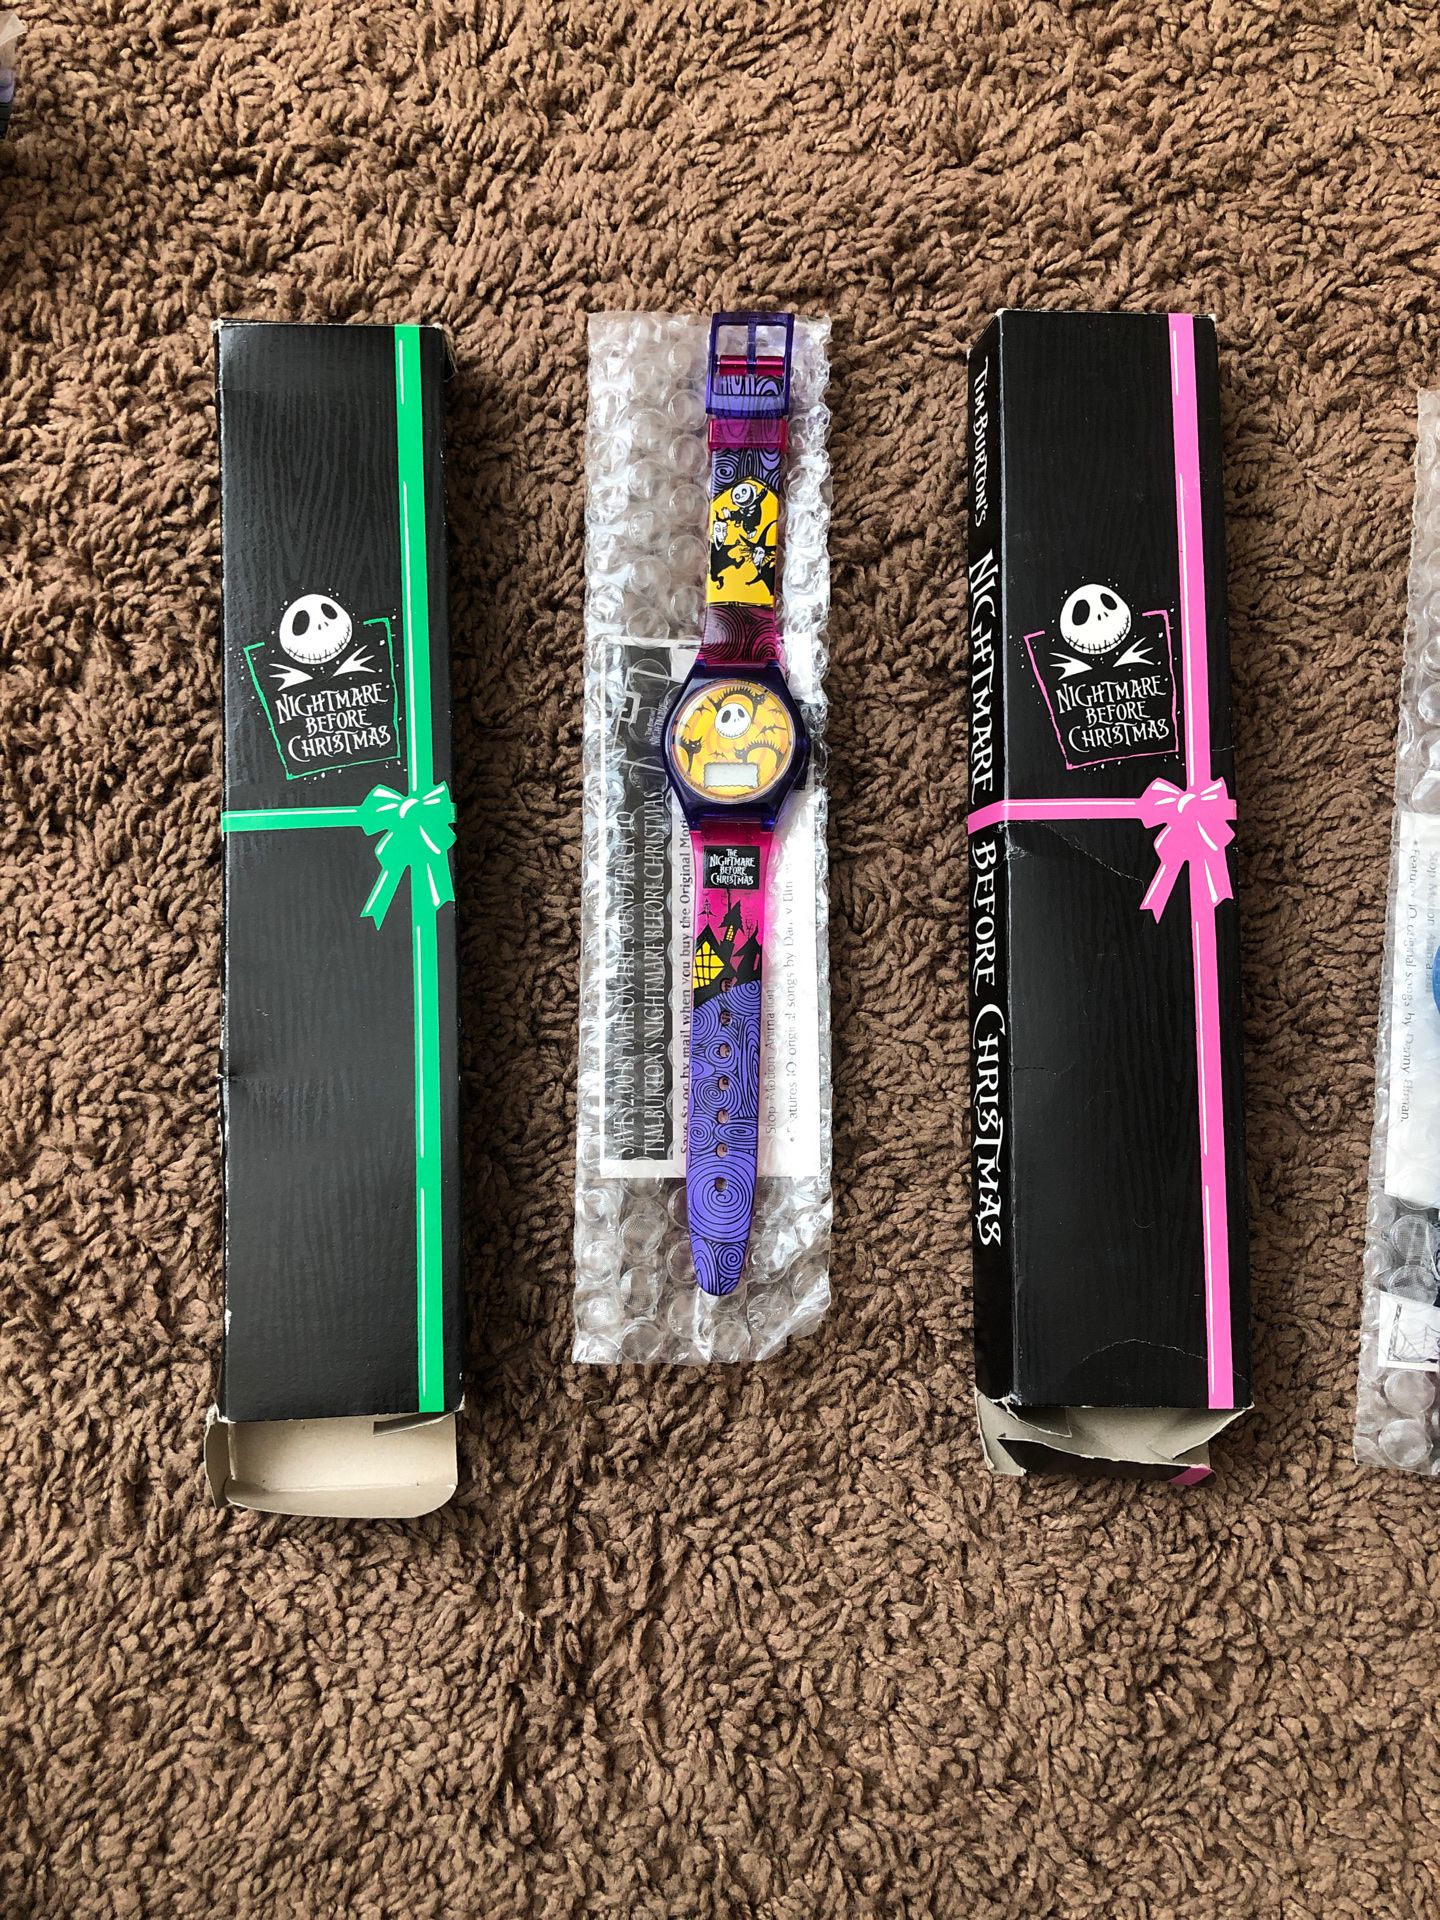 Nightmare Before Christmas watches-1990s